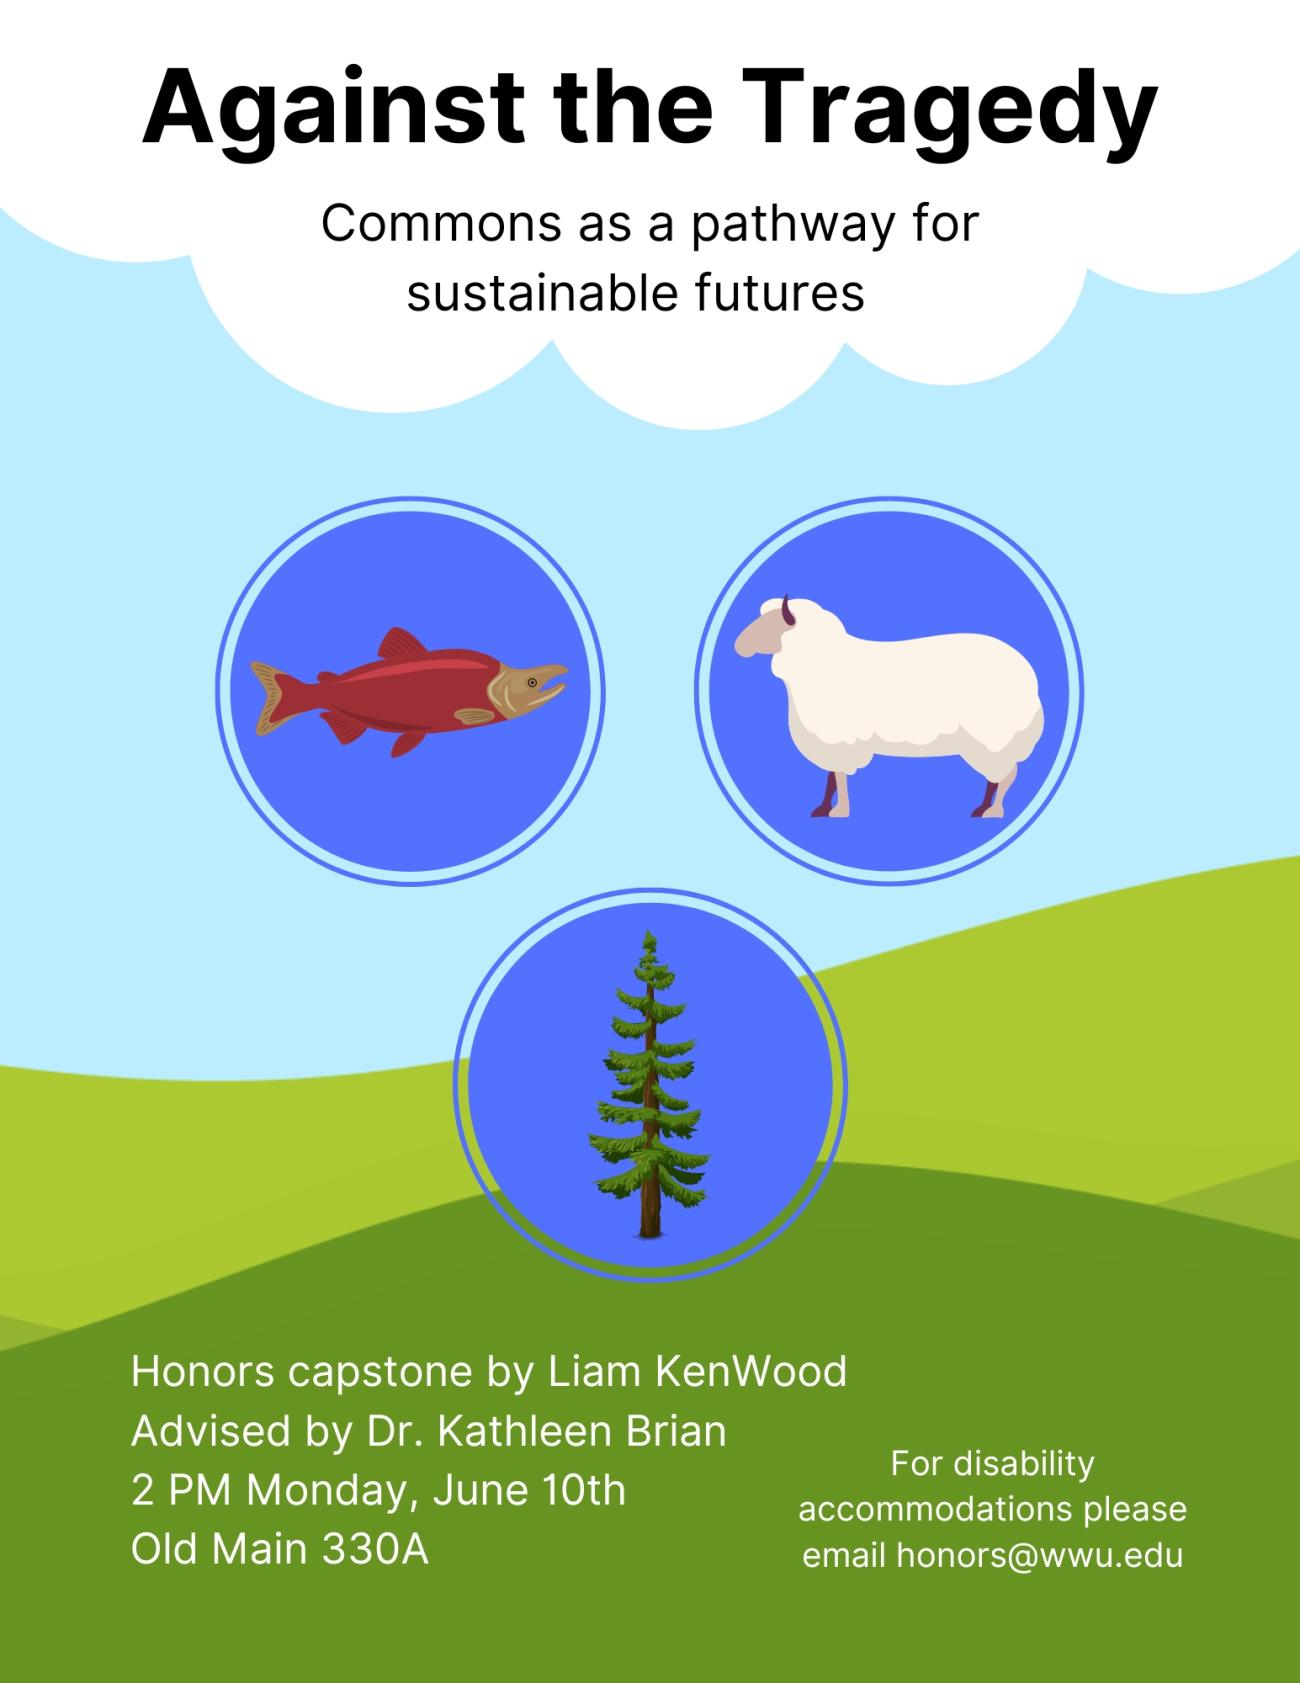 Poster with a sky blue background, rolling green hills at the bottom, and a white cloud at the top. A salmon, a sheep, and an evergreen occupy three blue circles in the middle. Title reads "Against the Tragedy: Commons as a pathway for sustainable futures." Bottom text reads "Honors capstone by Liam KenWood. Advised by Dr. Kathleen Brian. 2 PM Monday, June 10th. Old Main 330A. For disability accommodations please email honors@wwu.edu."